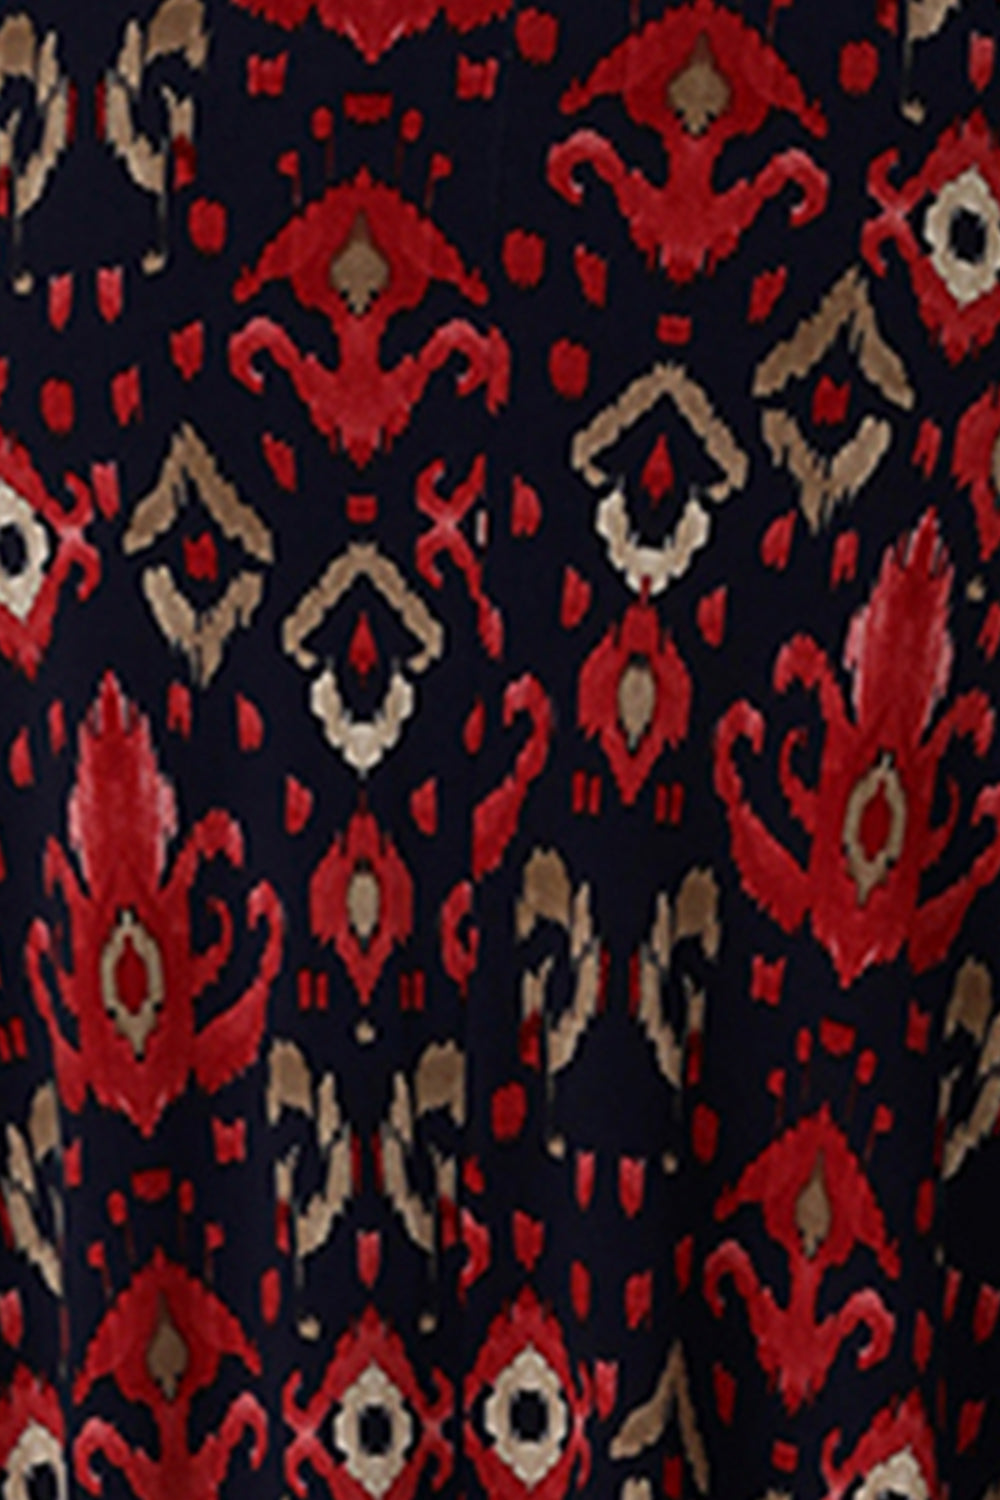 Swatch of Australian and New Zealand women's fashion label, Leina & Fleur's 'Ikat' print on easy-care jersey fabric used to make a range of maxi dresses.